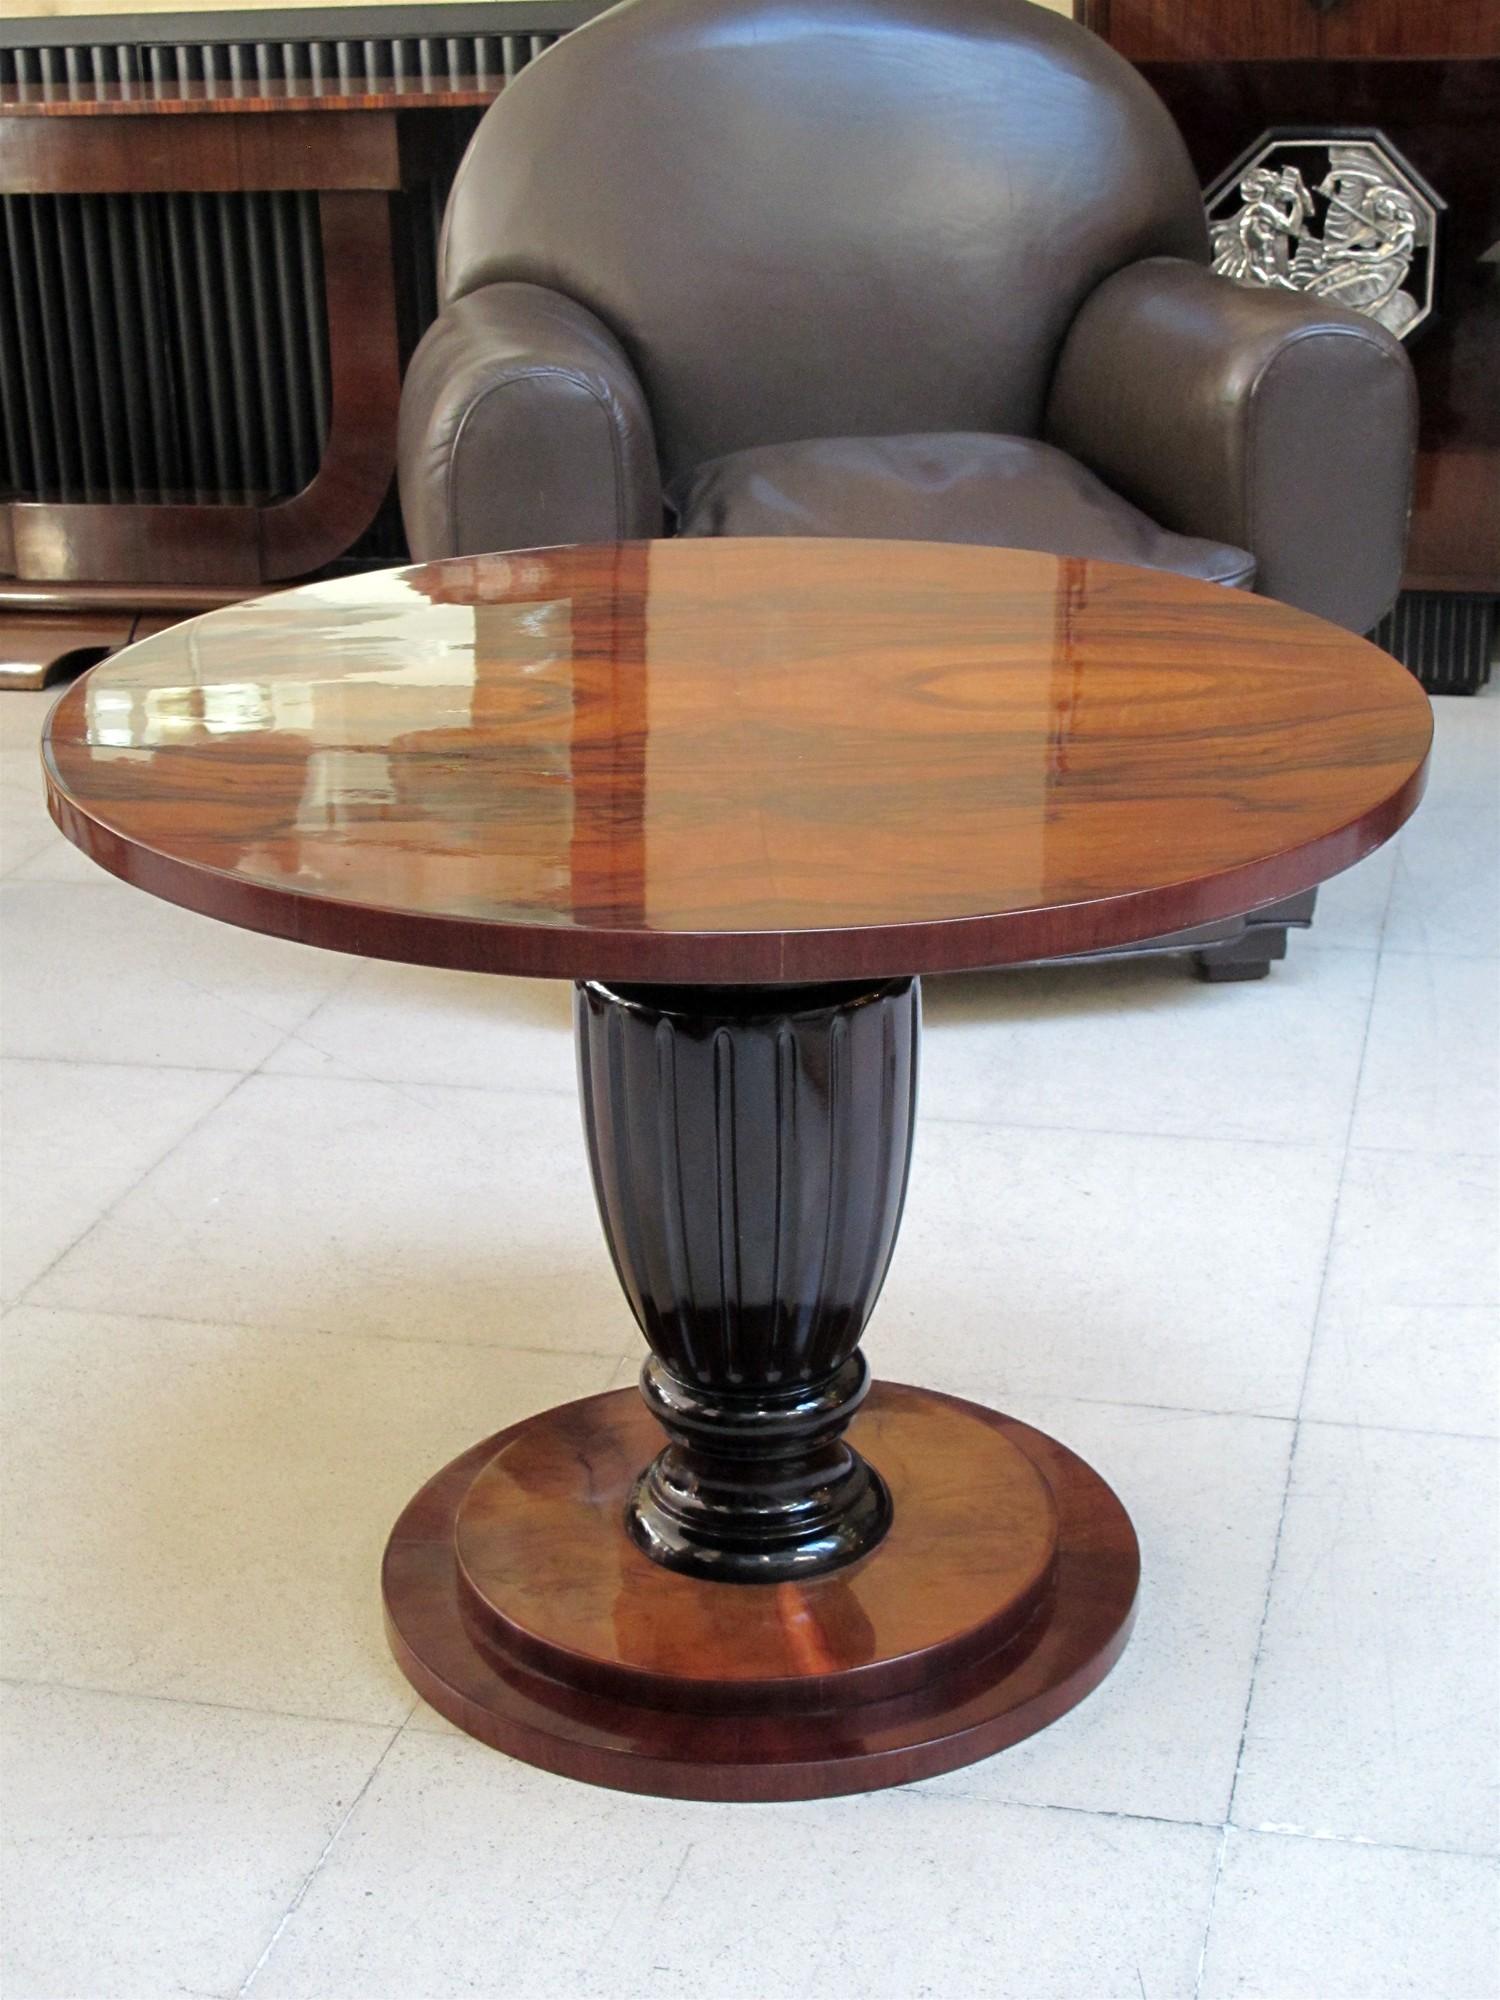 Exhibited at Palm Beach Jewelry, Art & Antique Show 
Two tables 
Material: wood 
Style: Art Deco
Country: France
We have specialized in the sale of Art Deco and Art Nouveau and Vintage styles since 1982. If you have any questions we are at your